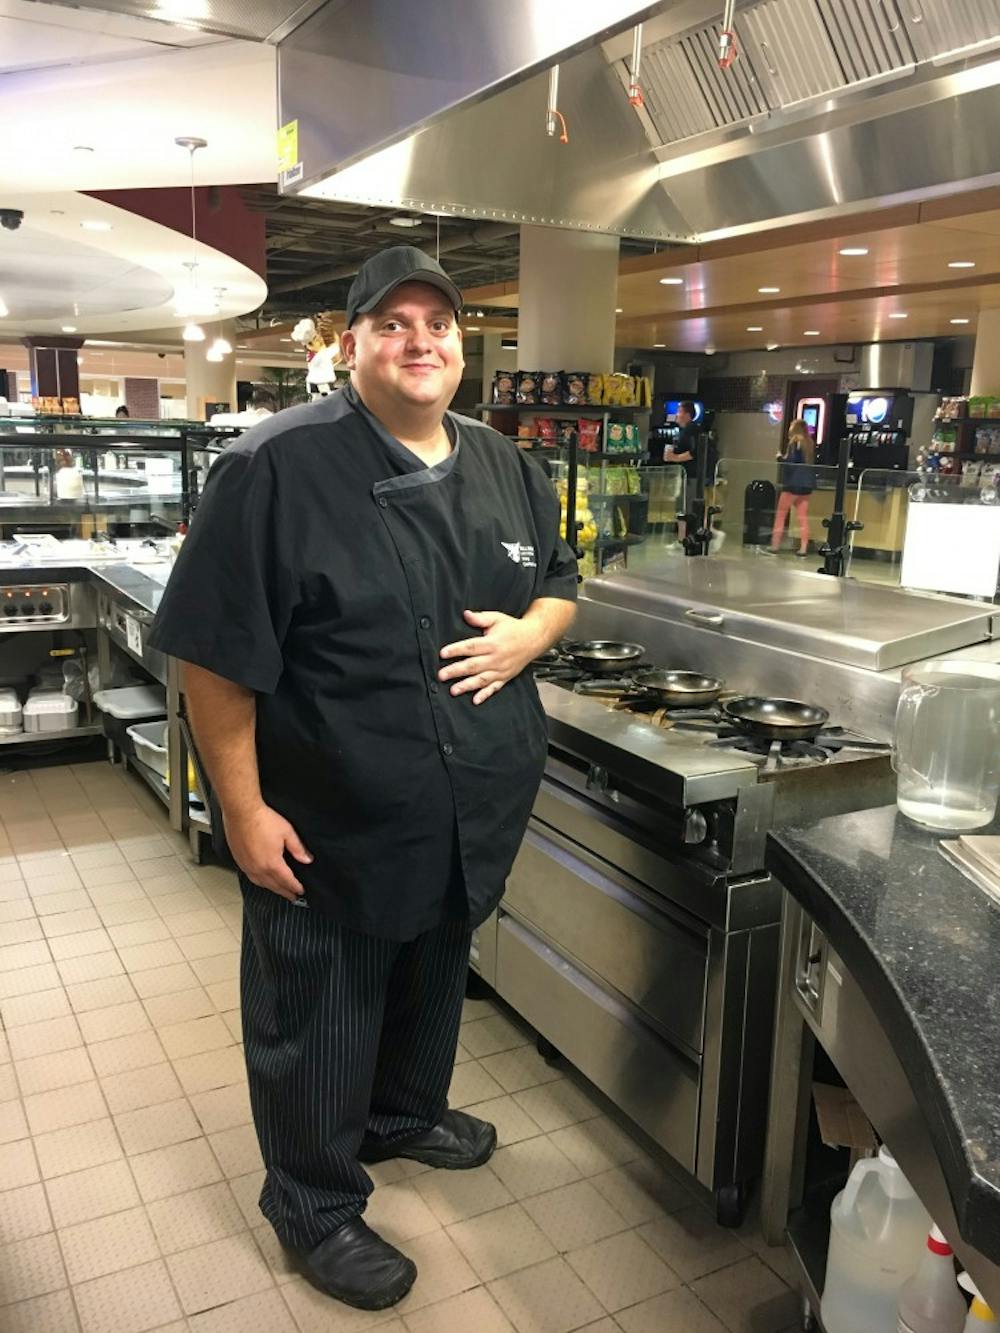 Chef Matt Hunter from the Student Center Tally prepares for the breakfast rush Sept. 19, 2018 in Muncie. This is Hunter's first Fall semester working at Ball State, as he joined the dining staff last semester. Tier Morrow, DN